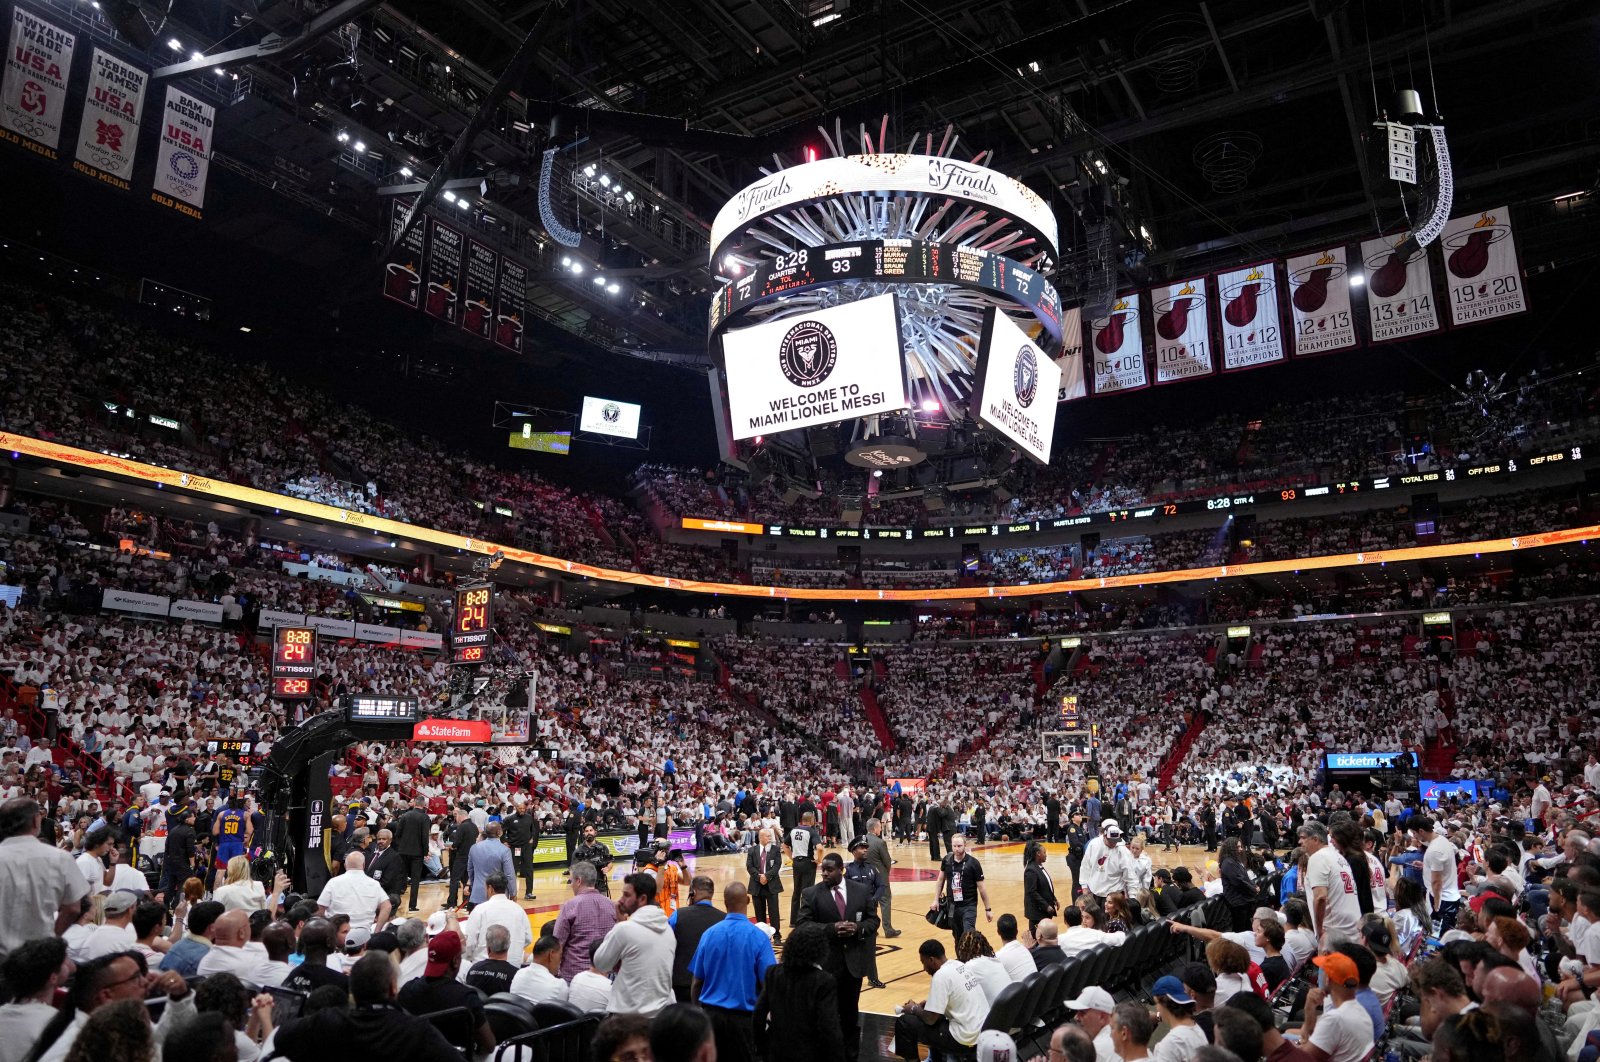 A general view of the video board with a welcome message for football player Lionel Messi to Inter Miami CF during Game 3 of the 2023 NBA Finals between the Miami Heat and Denver Nuggets at Kaseya Center, Miami, U.S., June 7, 2023. (Reuters Photo)